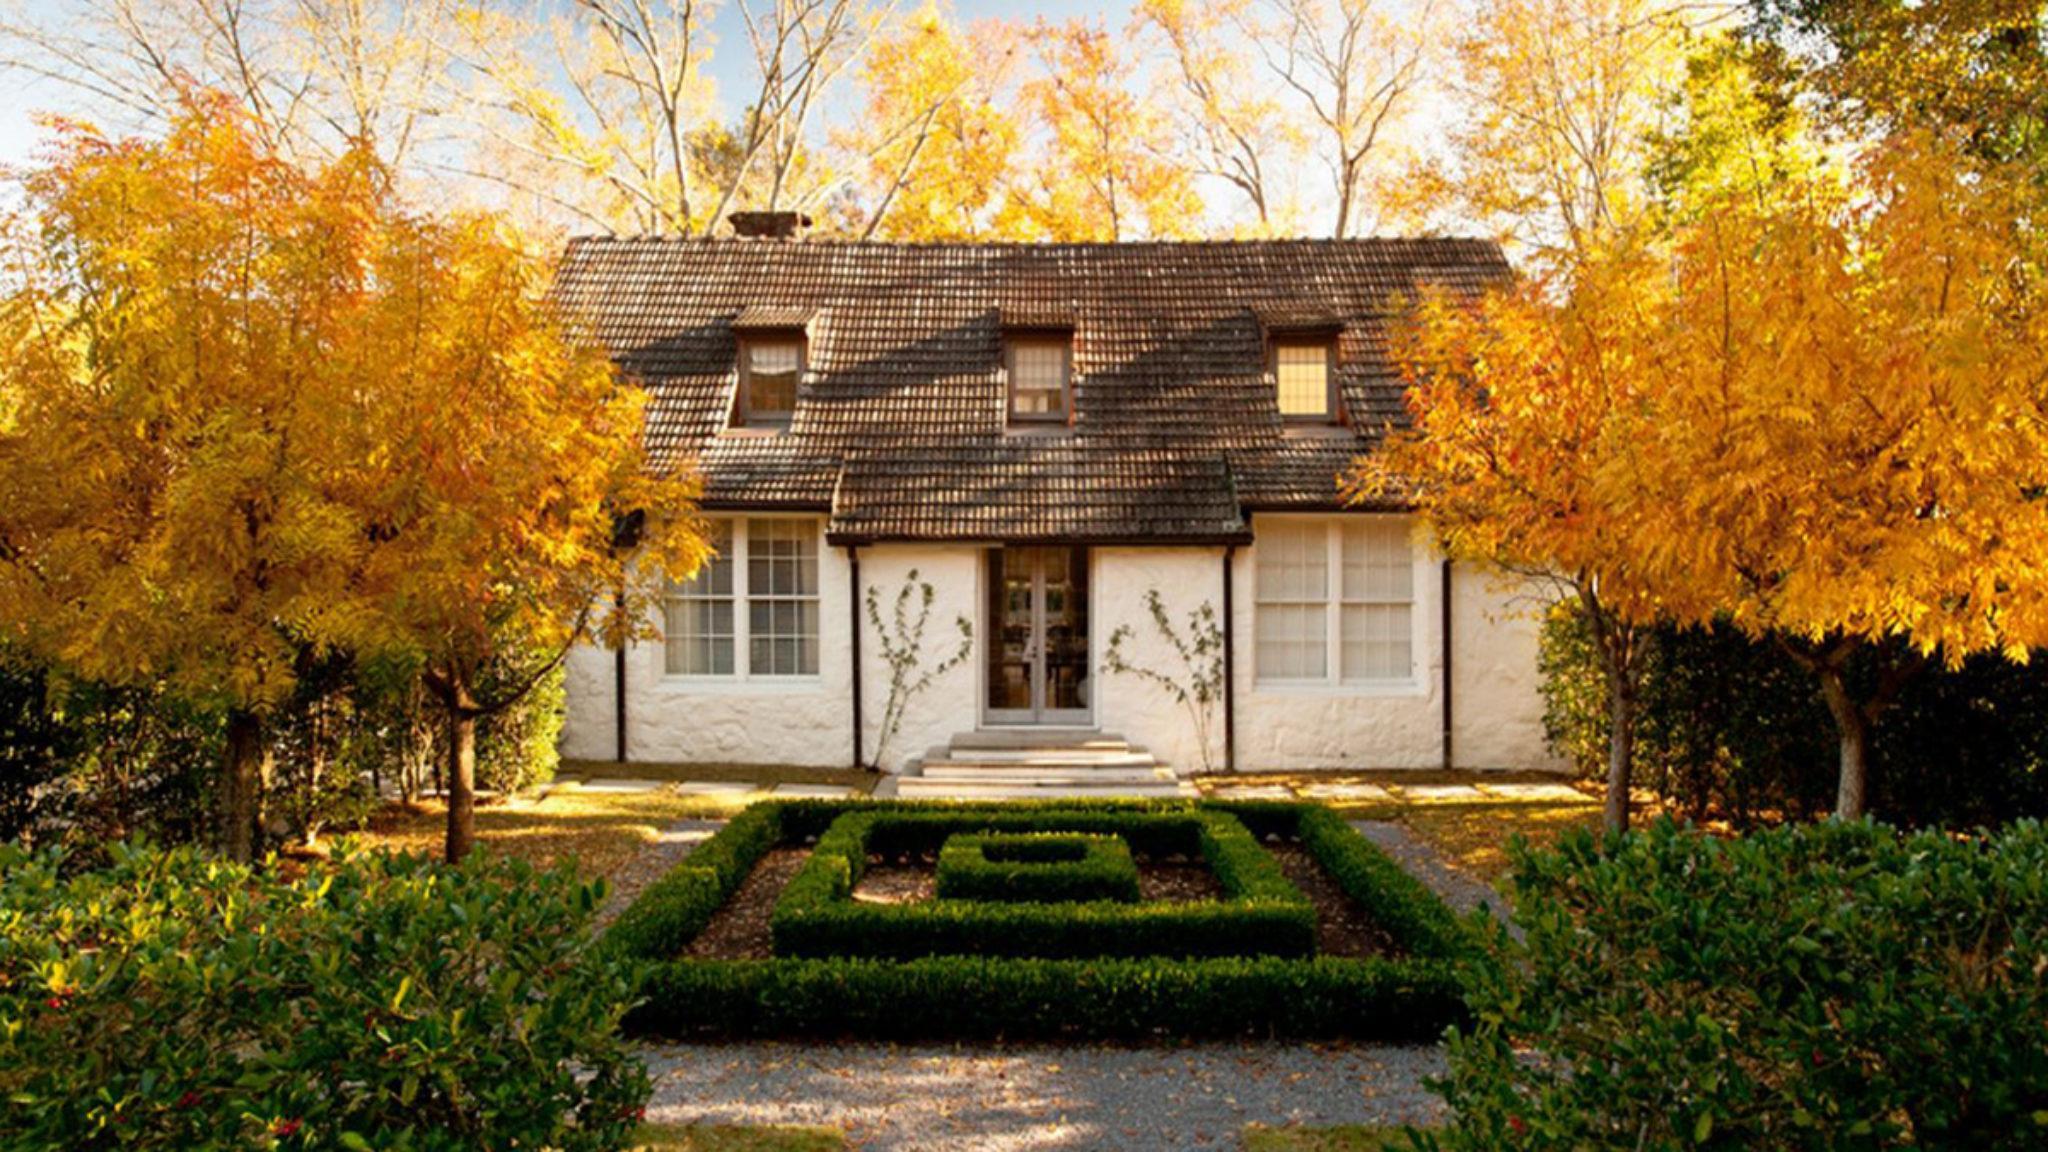 White cottage home with a garden full of golden-leafed trees and a maze style boxwood shrub in the center.